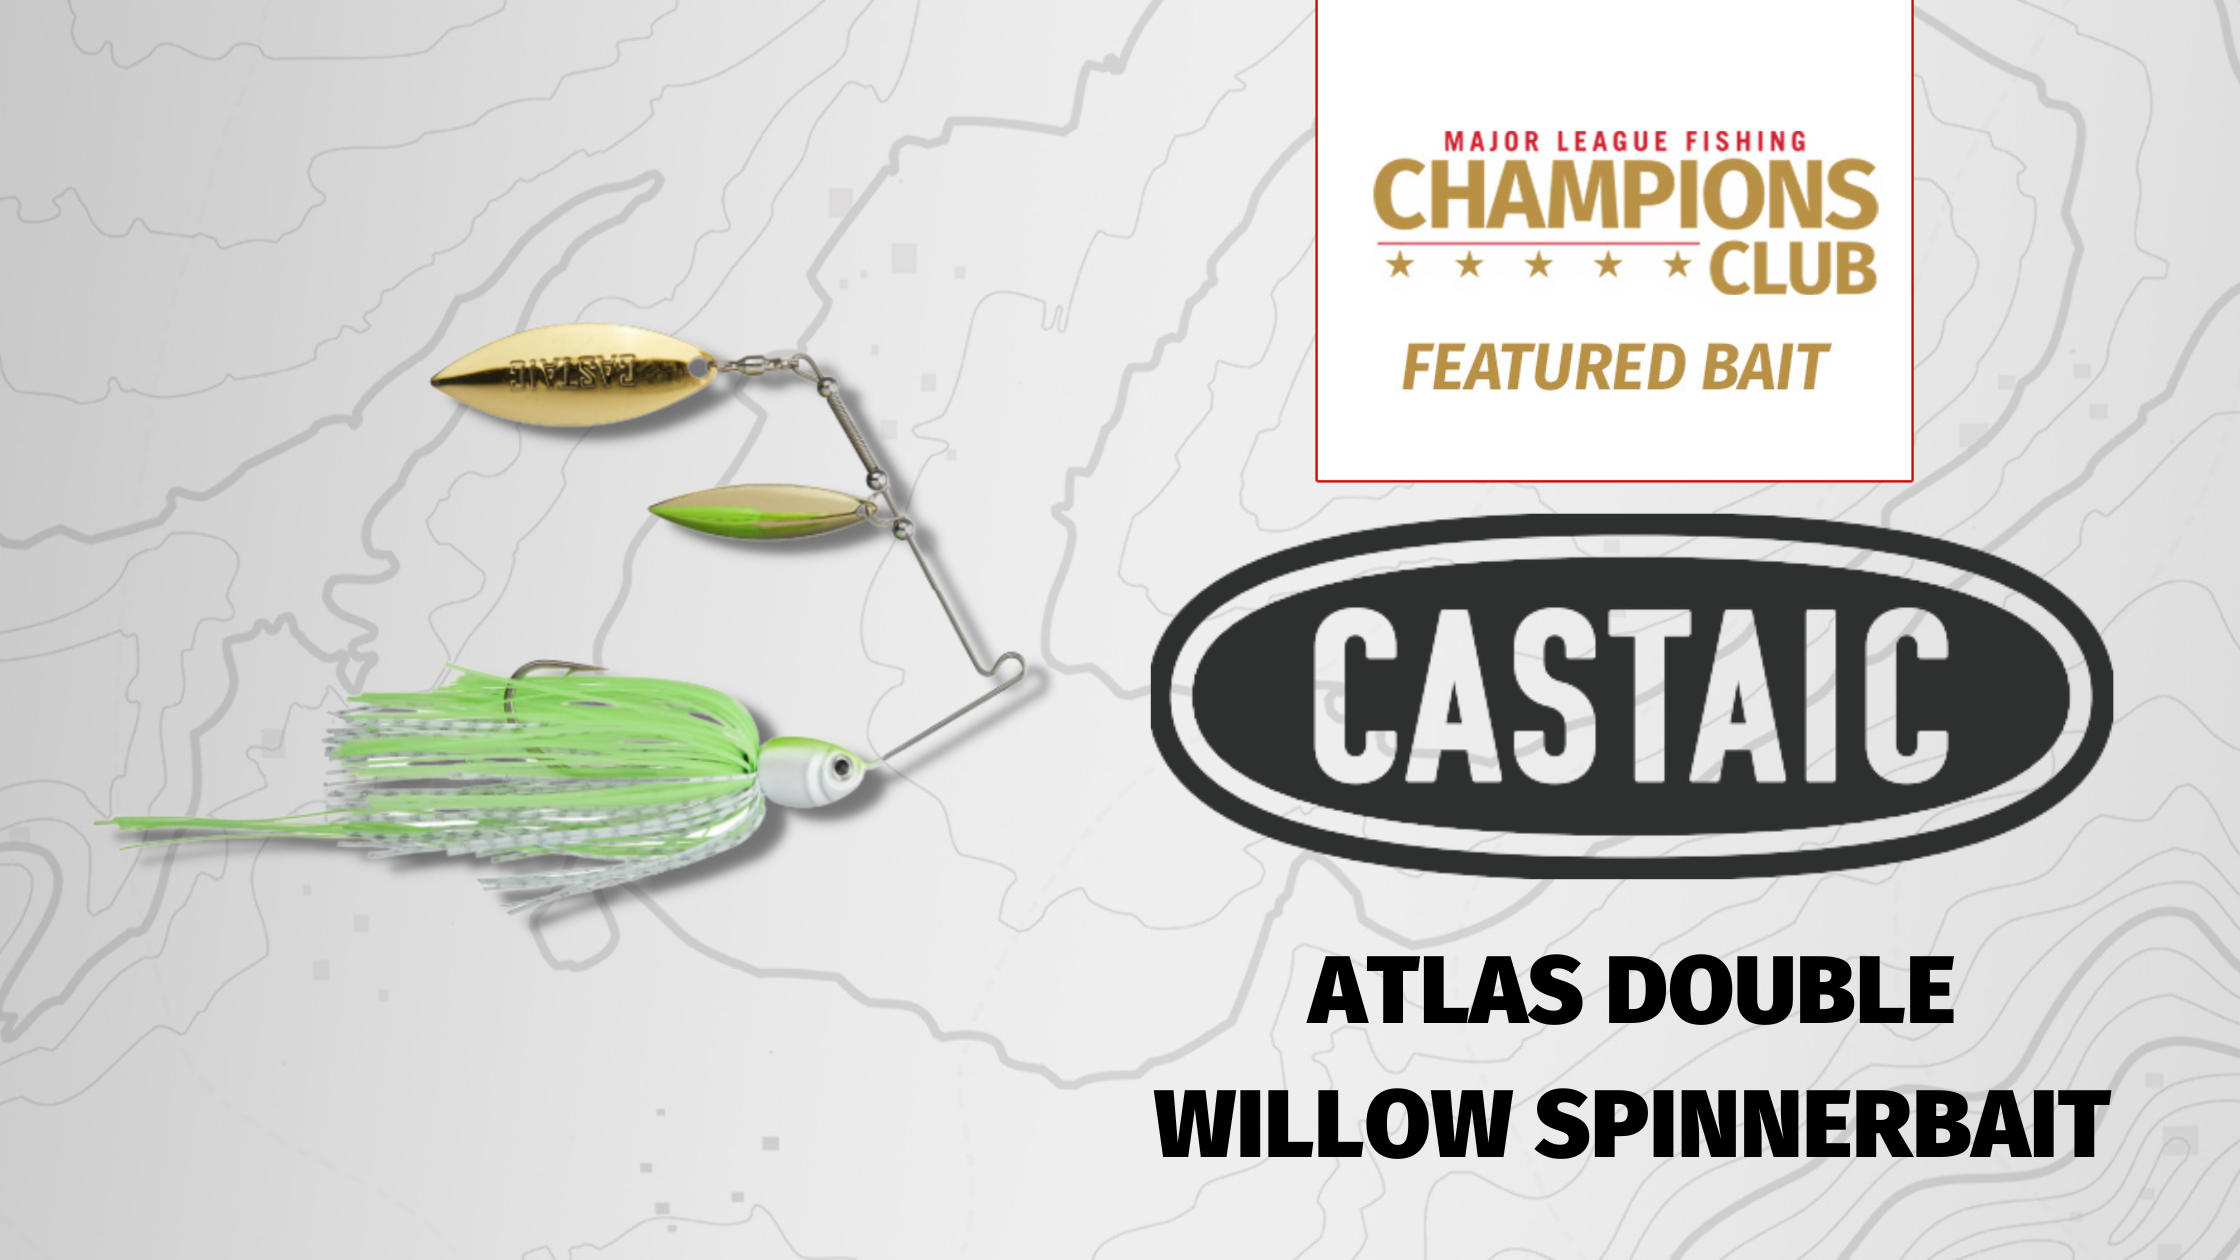 https://majorleaguefishing.com/wp-content/uploads/2022/08/29132812/September-2022-Castaic-ATLAS-DOUBLE-WILLOW-SPINNERBAIT.png